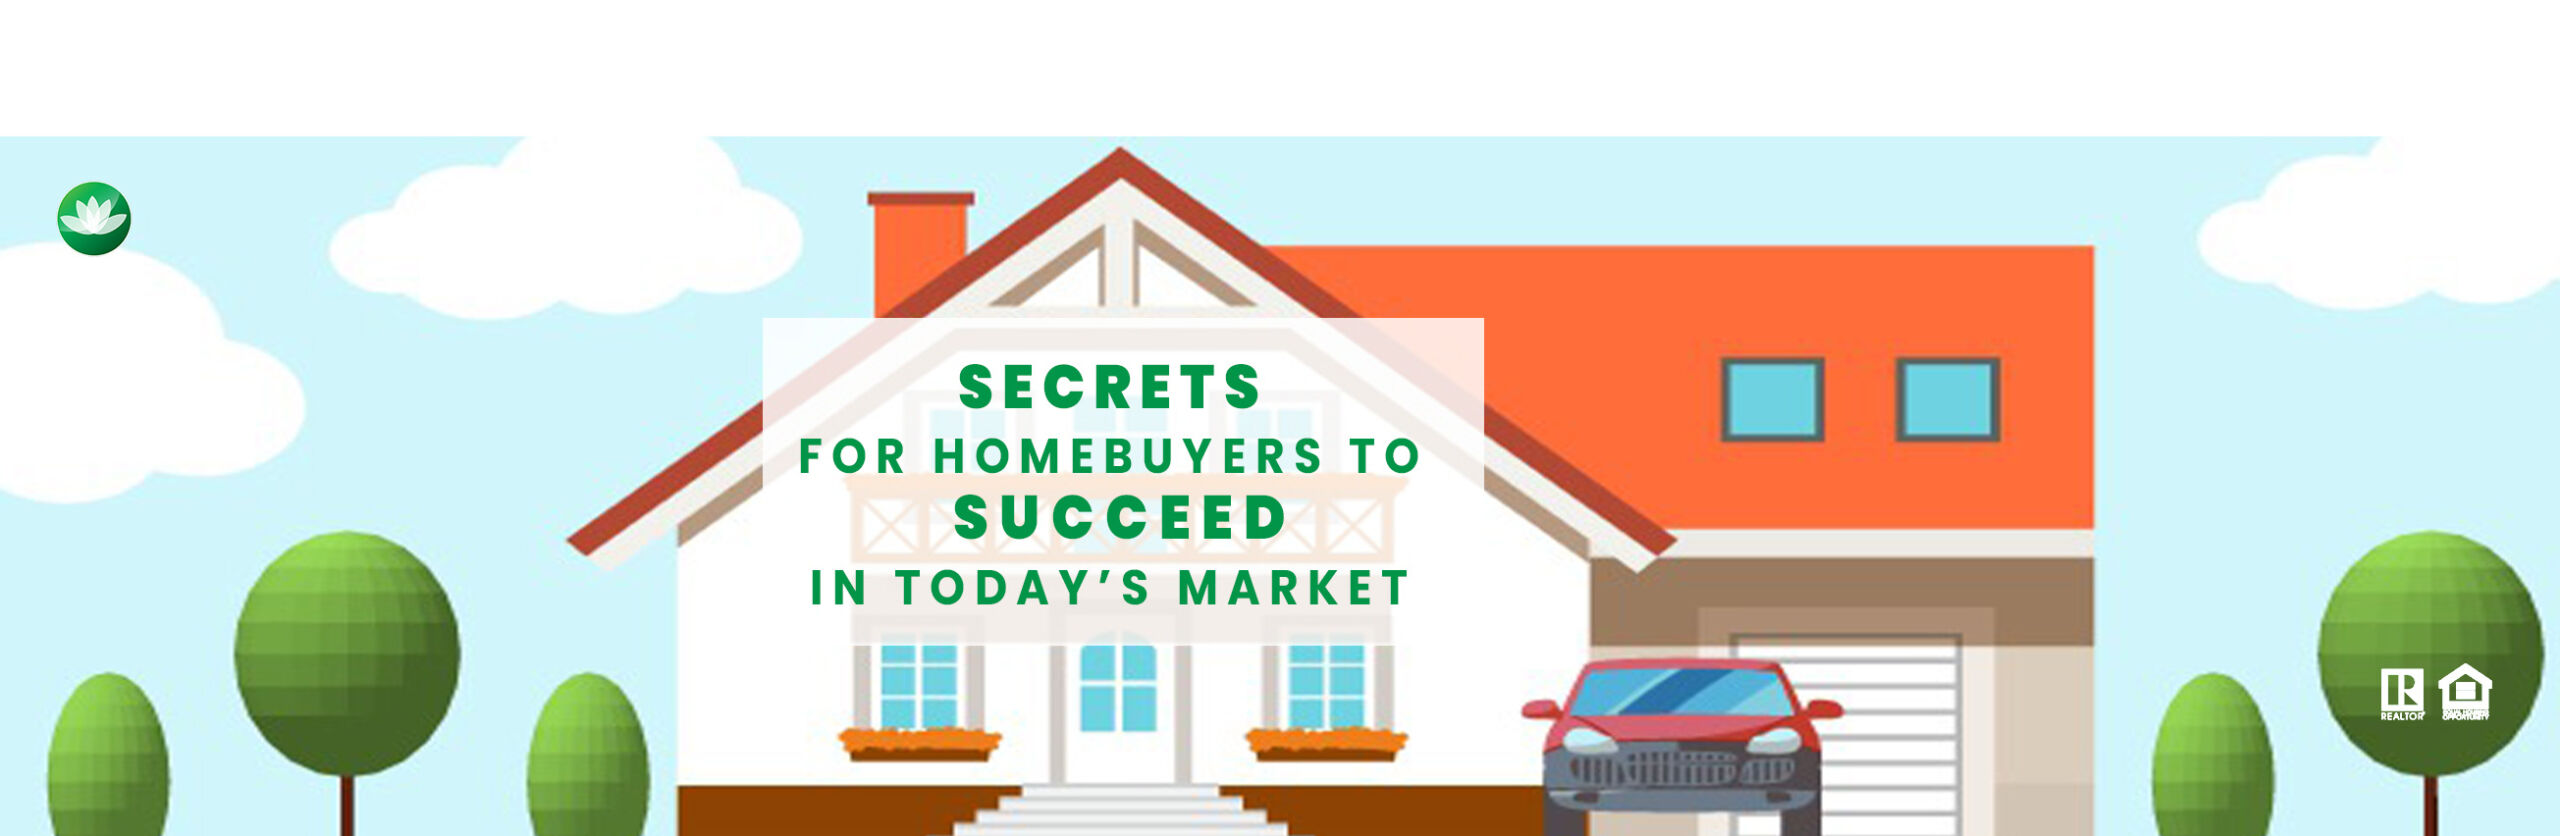 Homebuying Secrets in Today’s Market